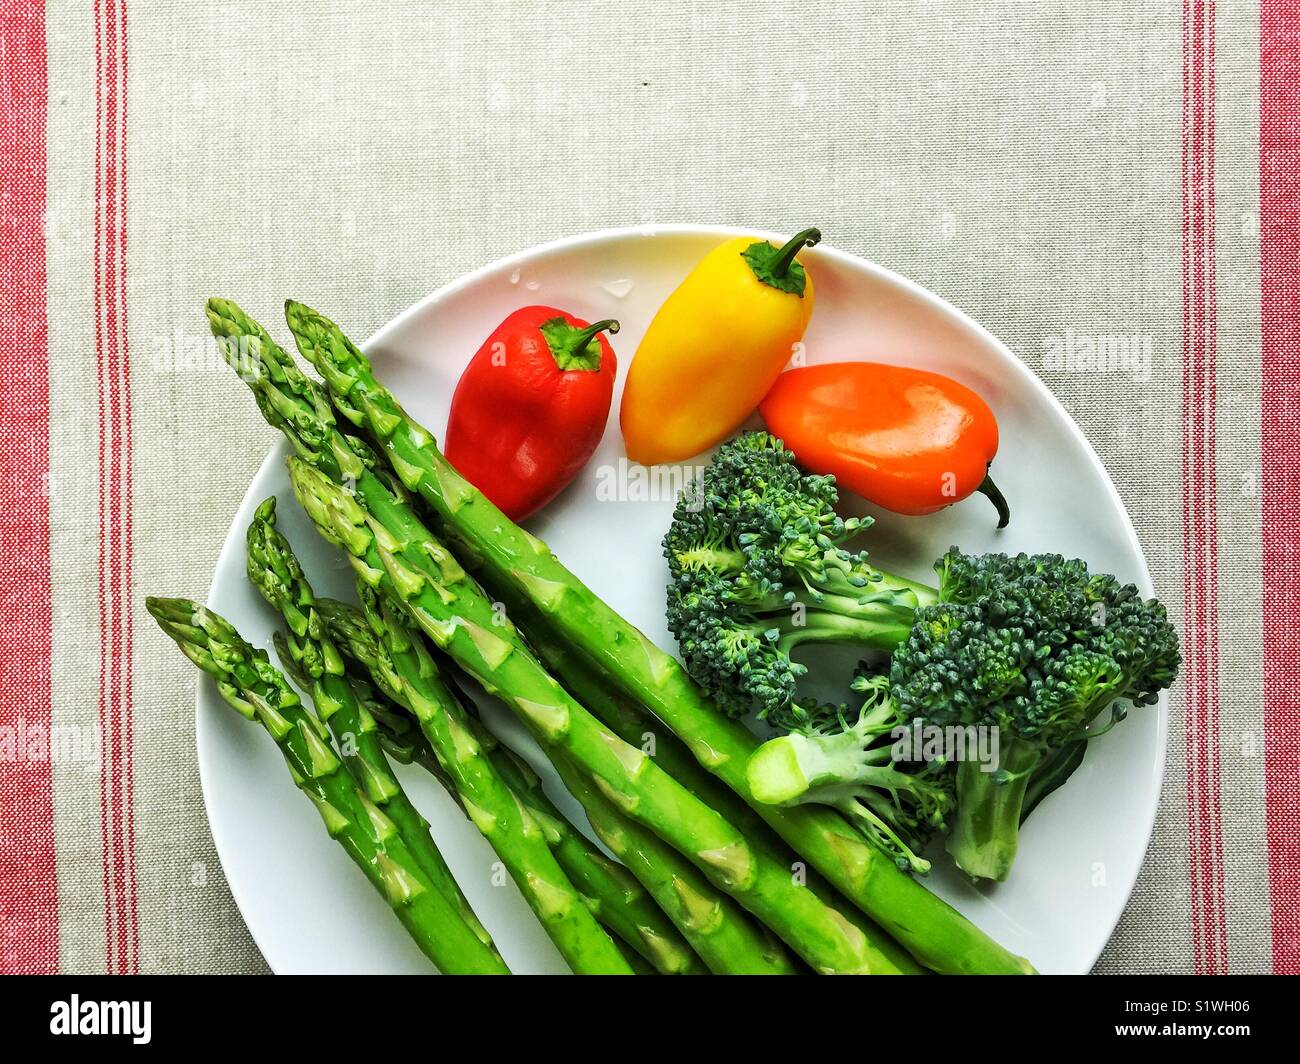 Healthy colorful veggies on white plate Stock Photo